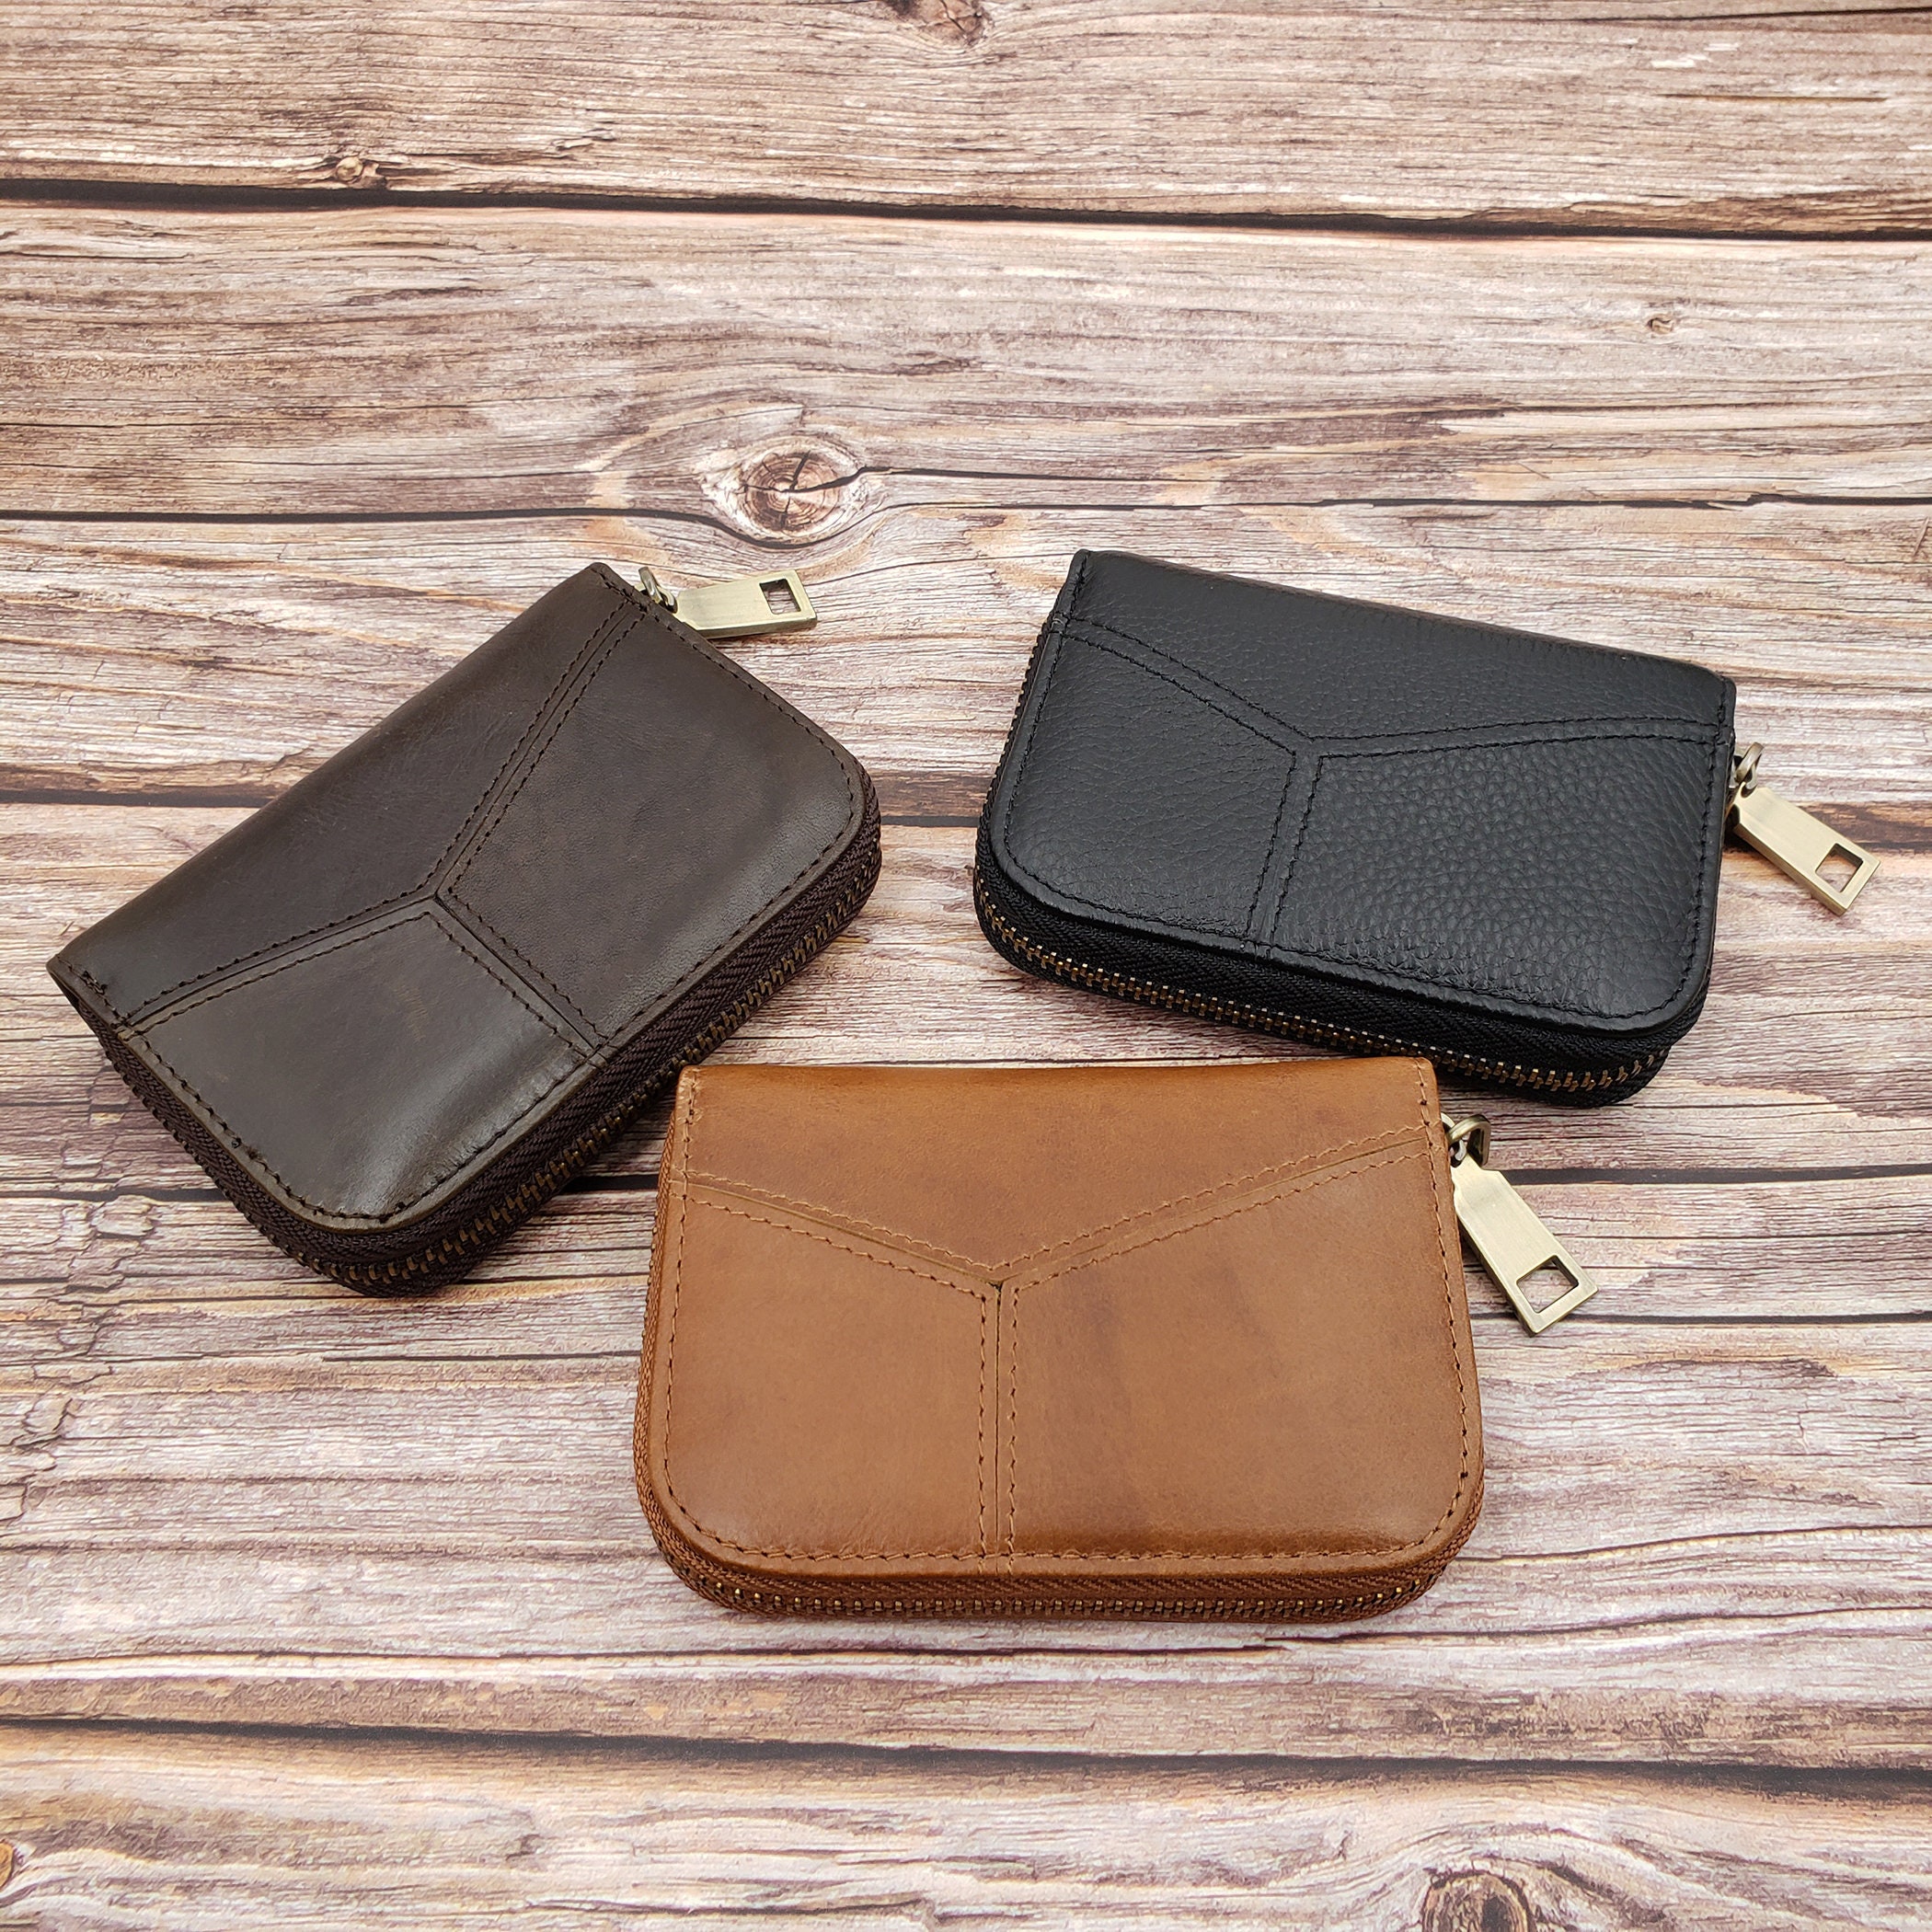 AG Wallets Unisex Small Cow Leather RFID Double Zipper Credit 